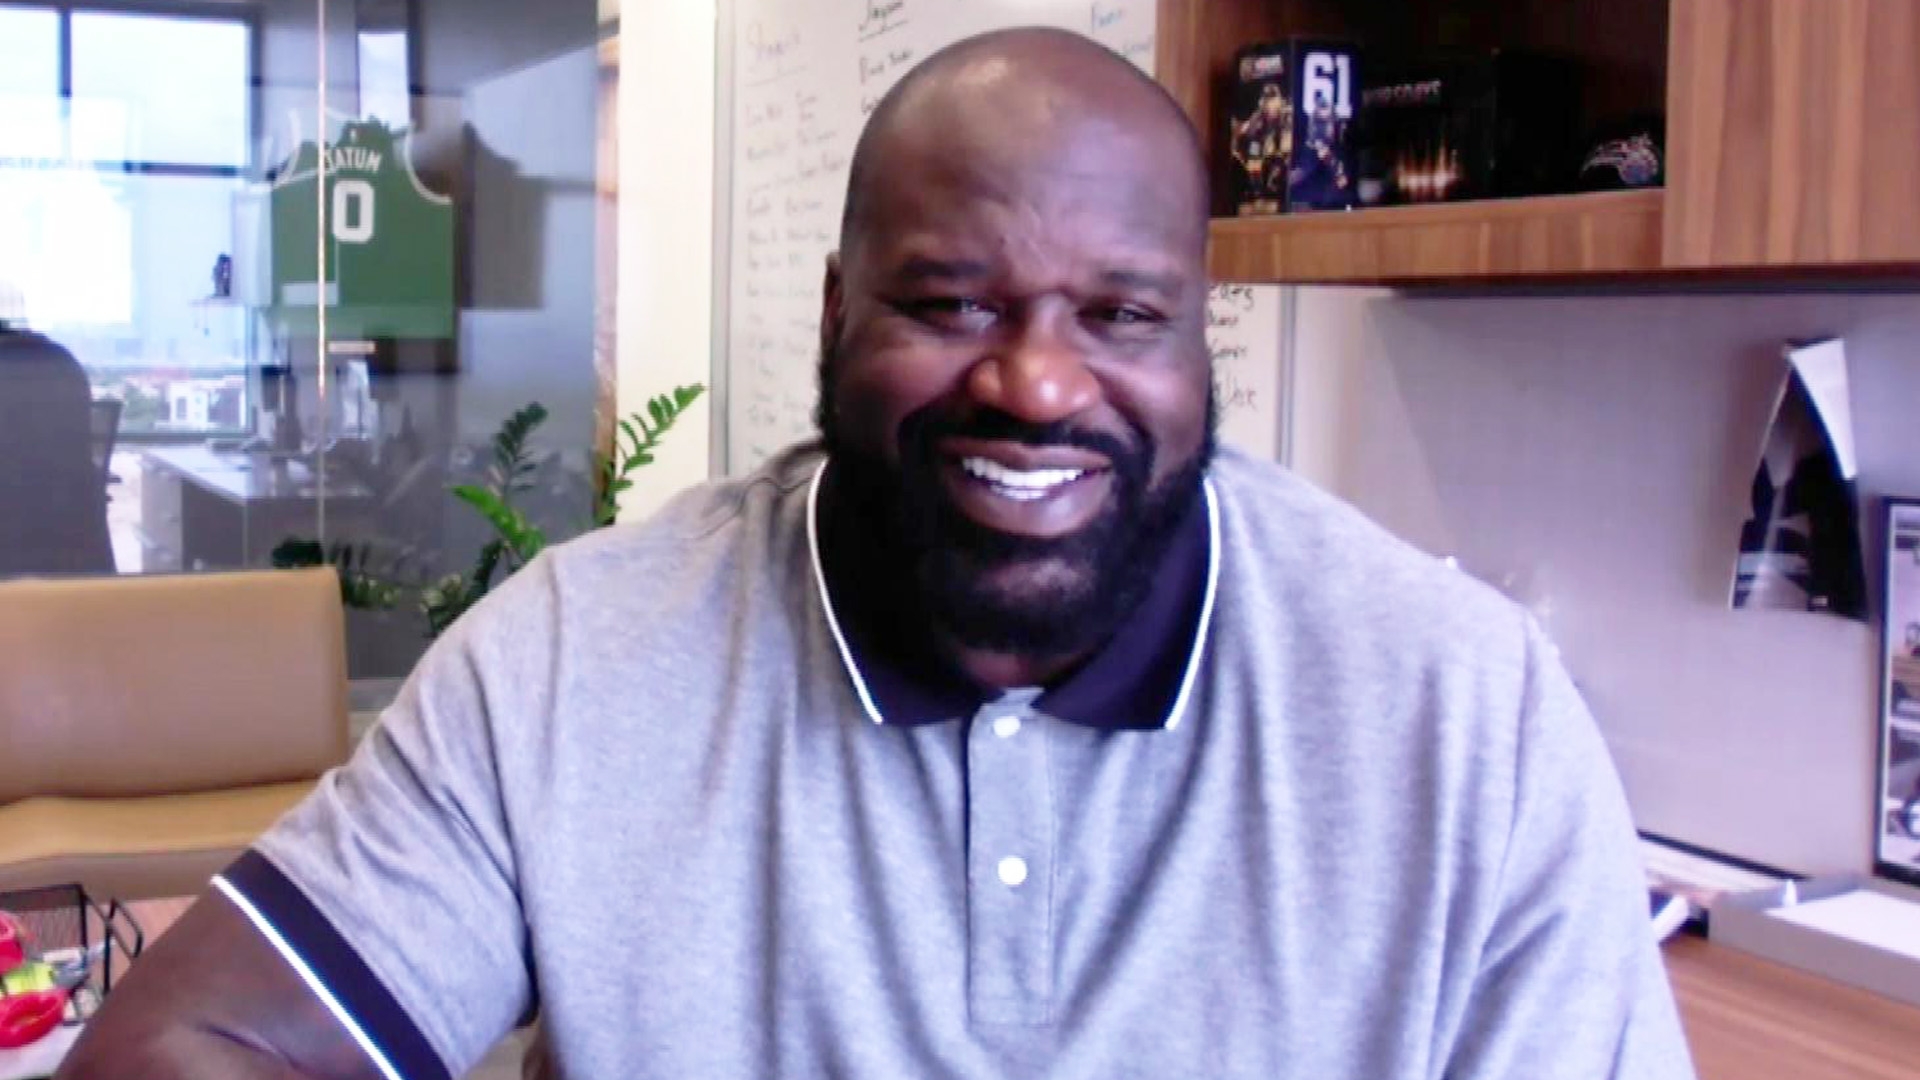 Shaquille O'Neal says his focus is on weight loss after recent checkup